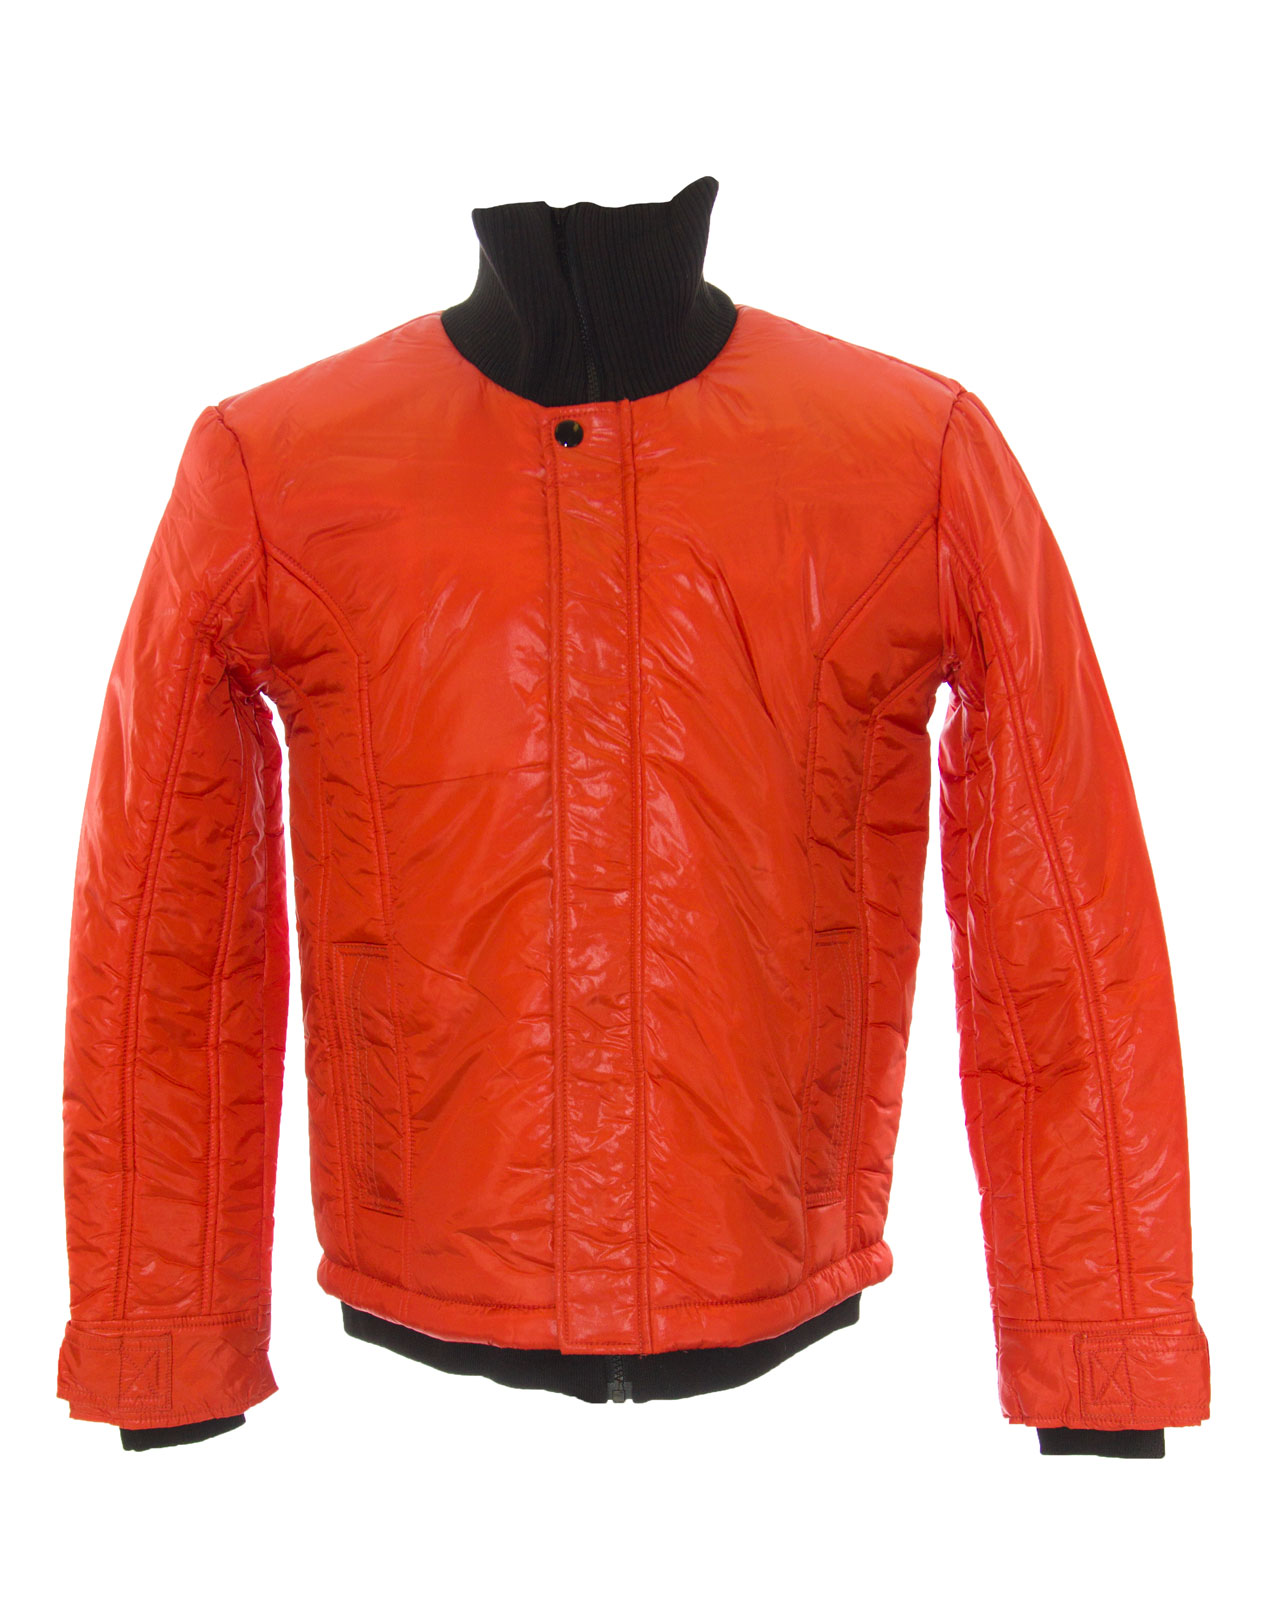 Cold Method Men's Turtle Bomber Puffer Coat Small Red Coral - image 1 of 1